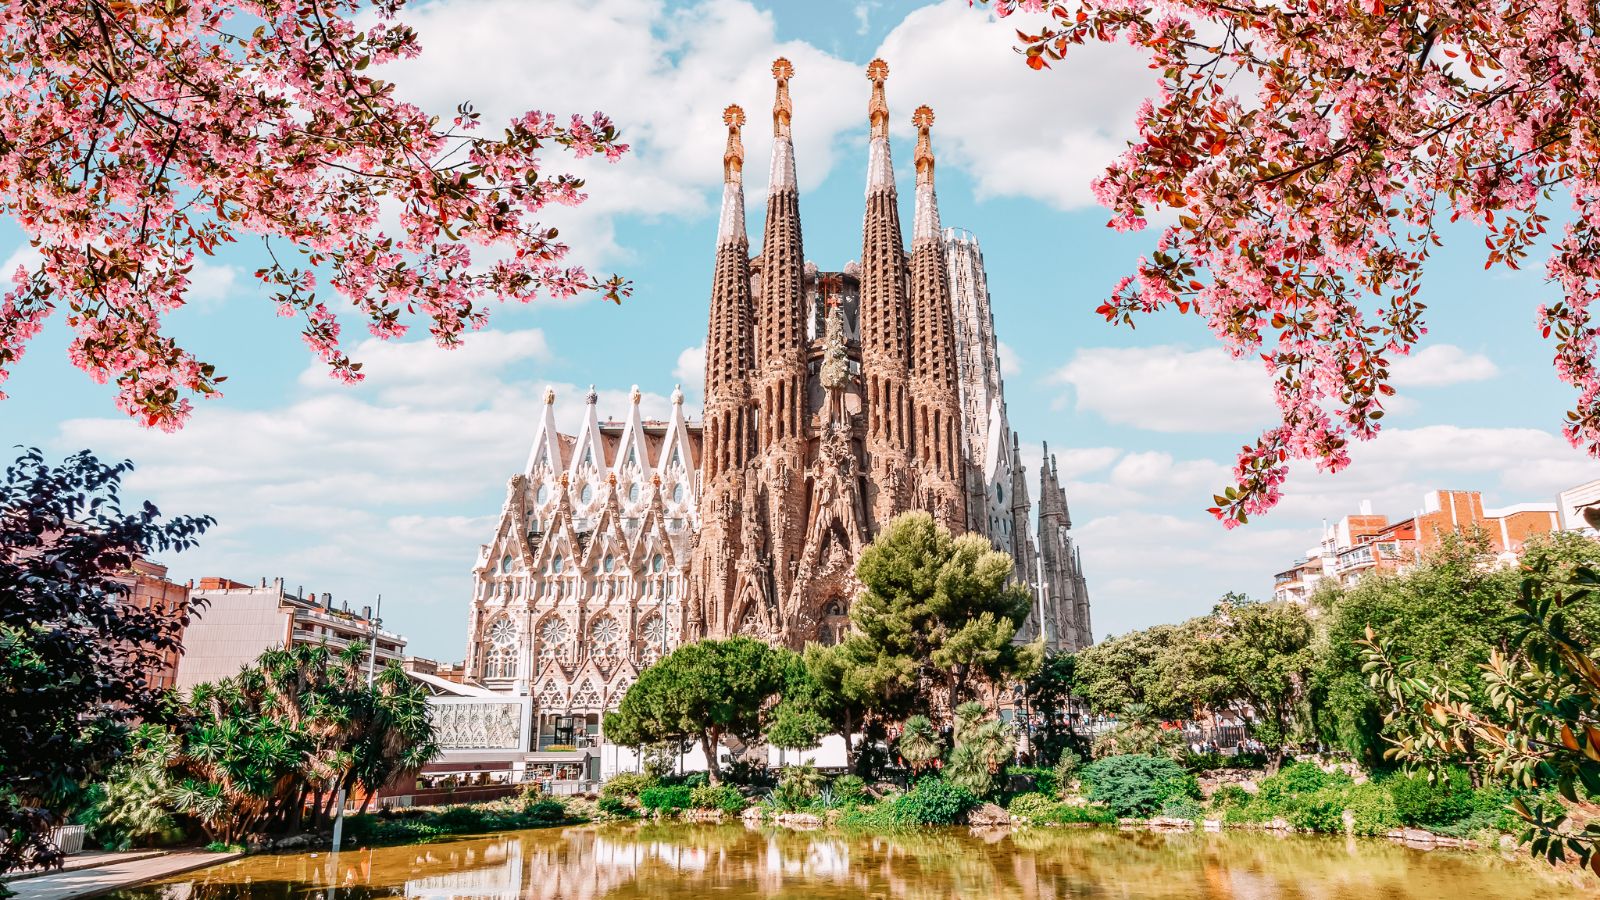 <p>If you’re planning a trip to Barcelona, you’ll be happy to know that there are plenty of exciting things to do and see in the city. From iconic landmarks like Park Güell and La Sagrada Familia to fun activities at the beach, there’s something for everyone here.</p> <p>We’ve also put together a selection of hotels that are conveniently located in the center of the city and offer great amenities to make your stay comfortable and enjoyable. </p> <p>So, discover the best things to do in Barcelona and find cool places, activities, and tips to make the most of your trip.</p>